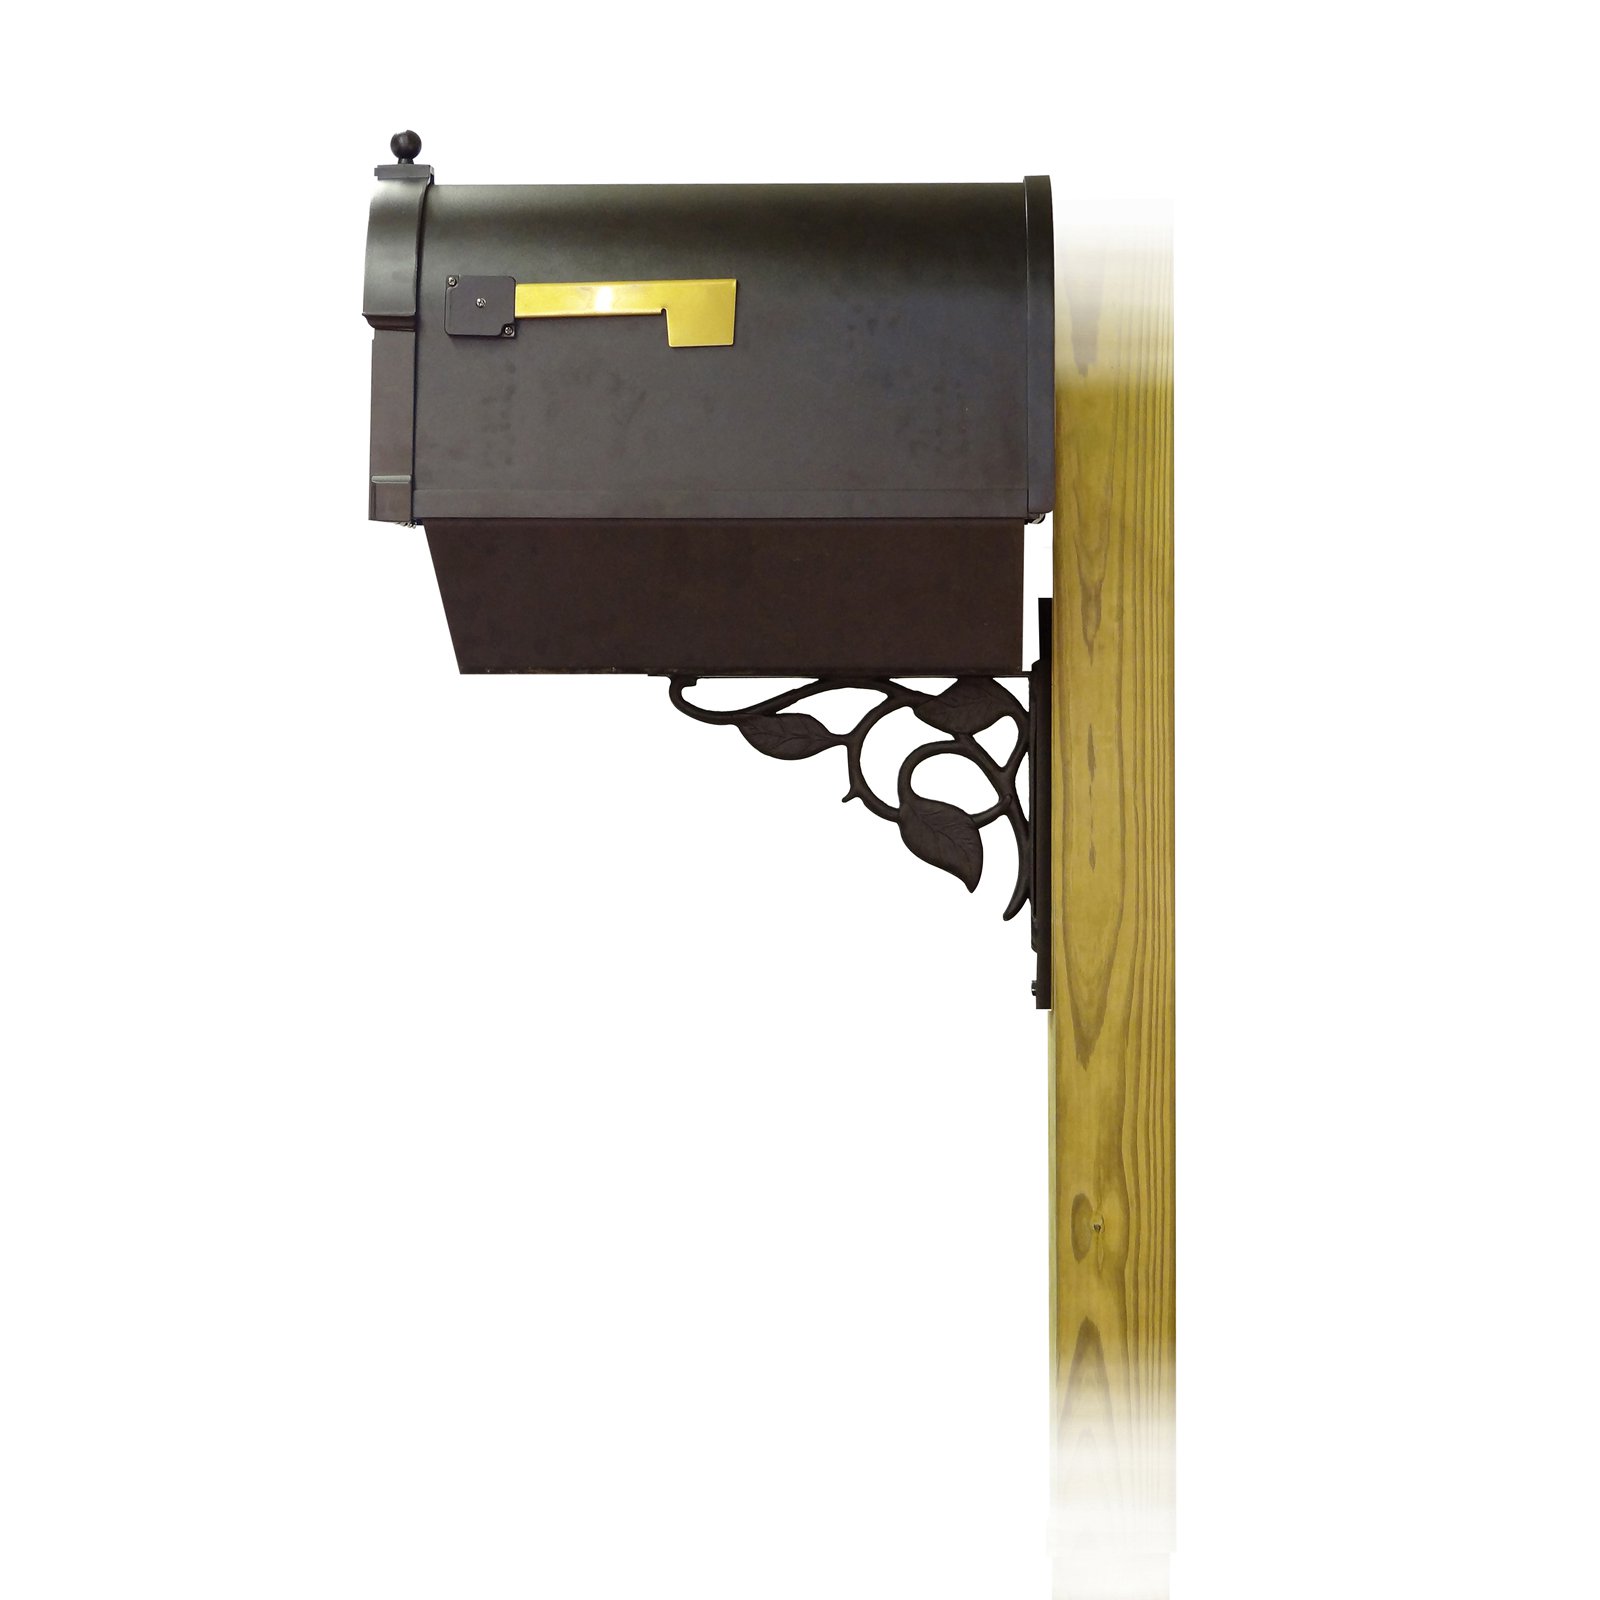 Special Lite Products Berkshire Curbside Mailbox with Front Address Numbers Newspaper Tube and Floral Mailbox Mounting Bracket - image 3 of 4